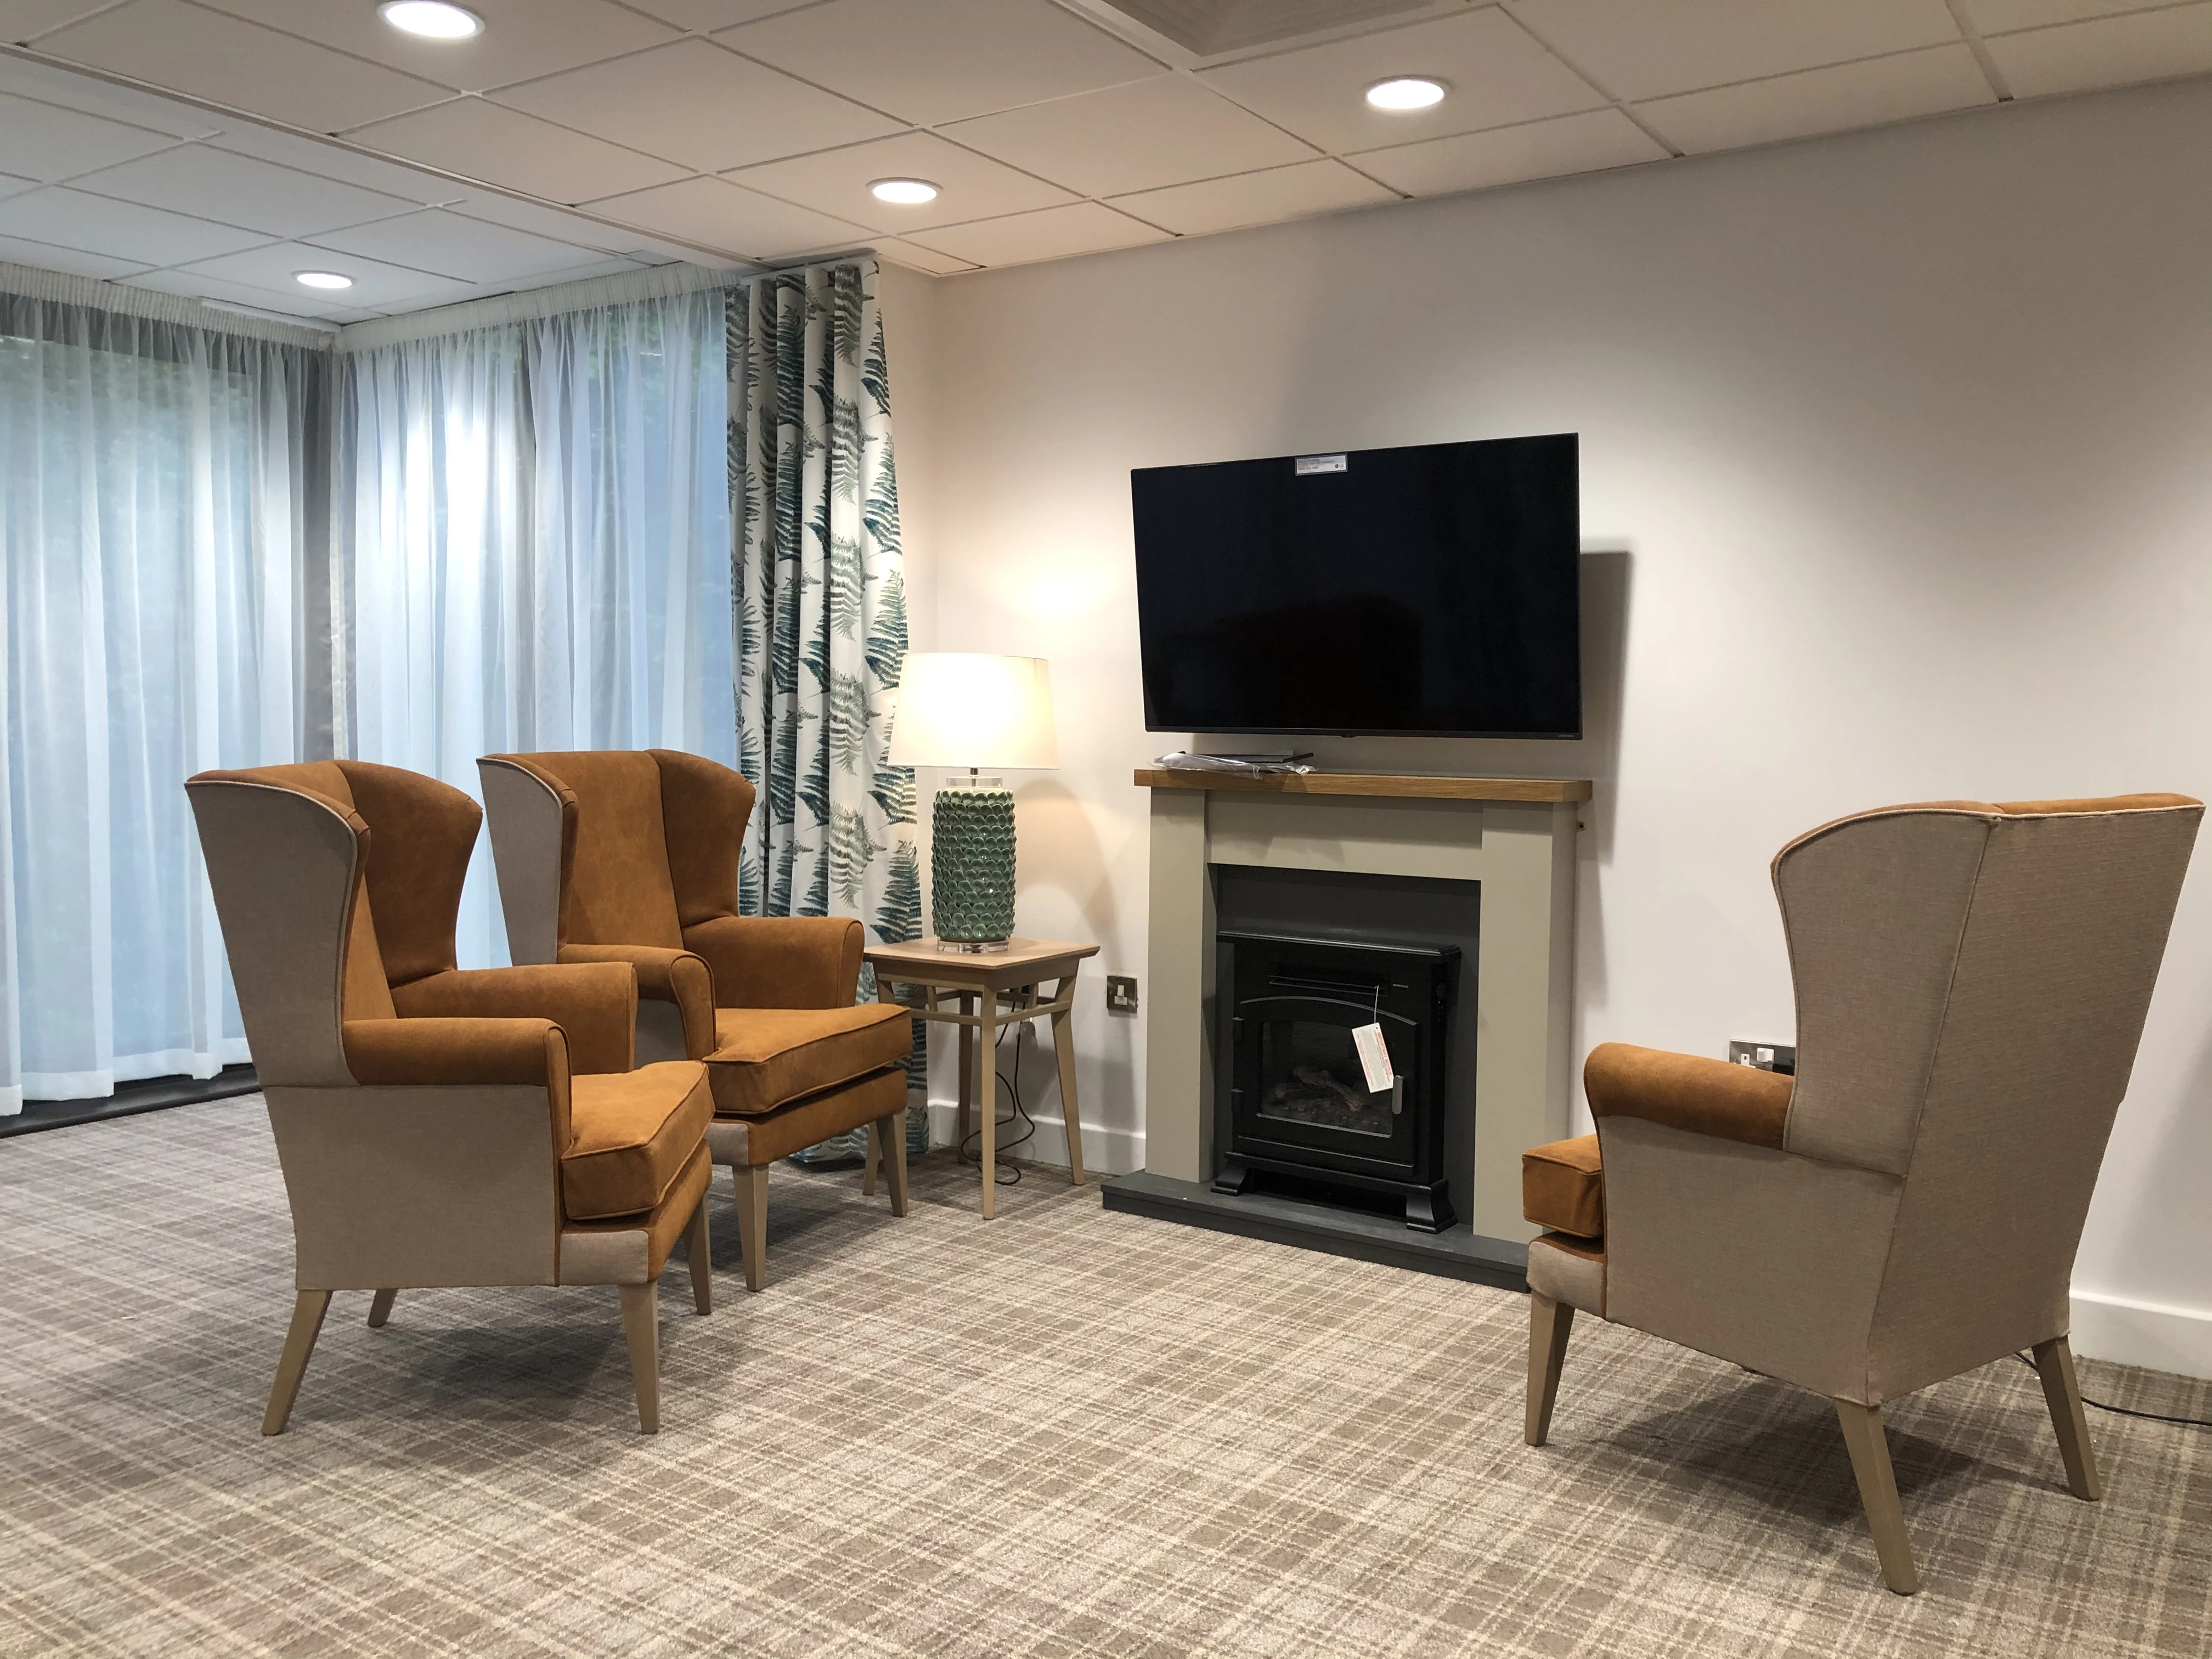 One of the residents' lounges at the £15m Broughton House Veteran Care Village in Salford